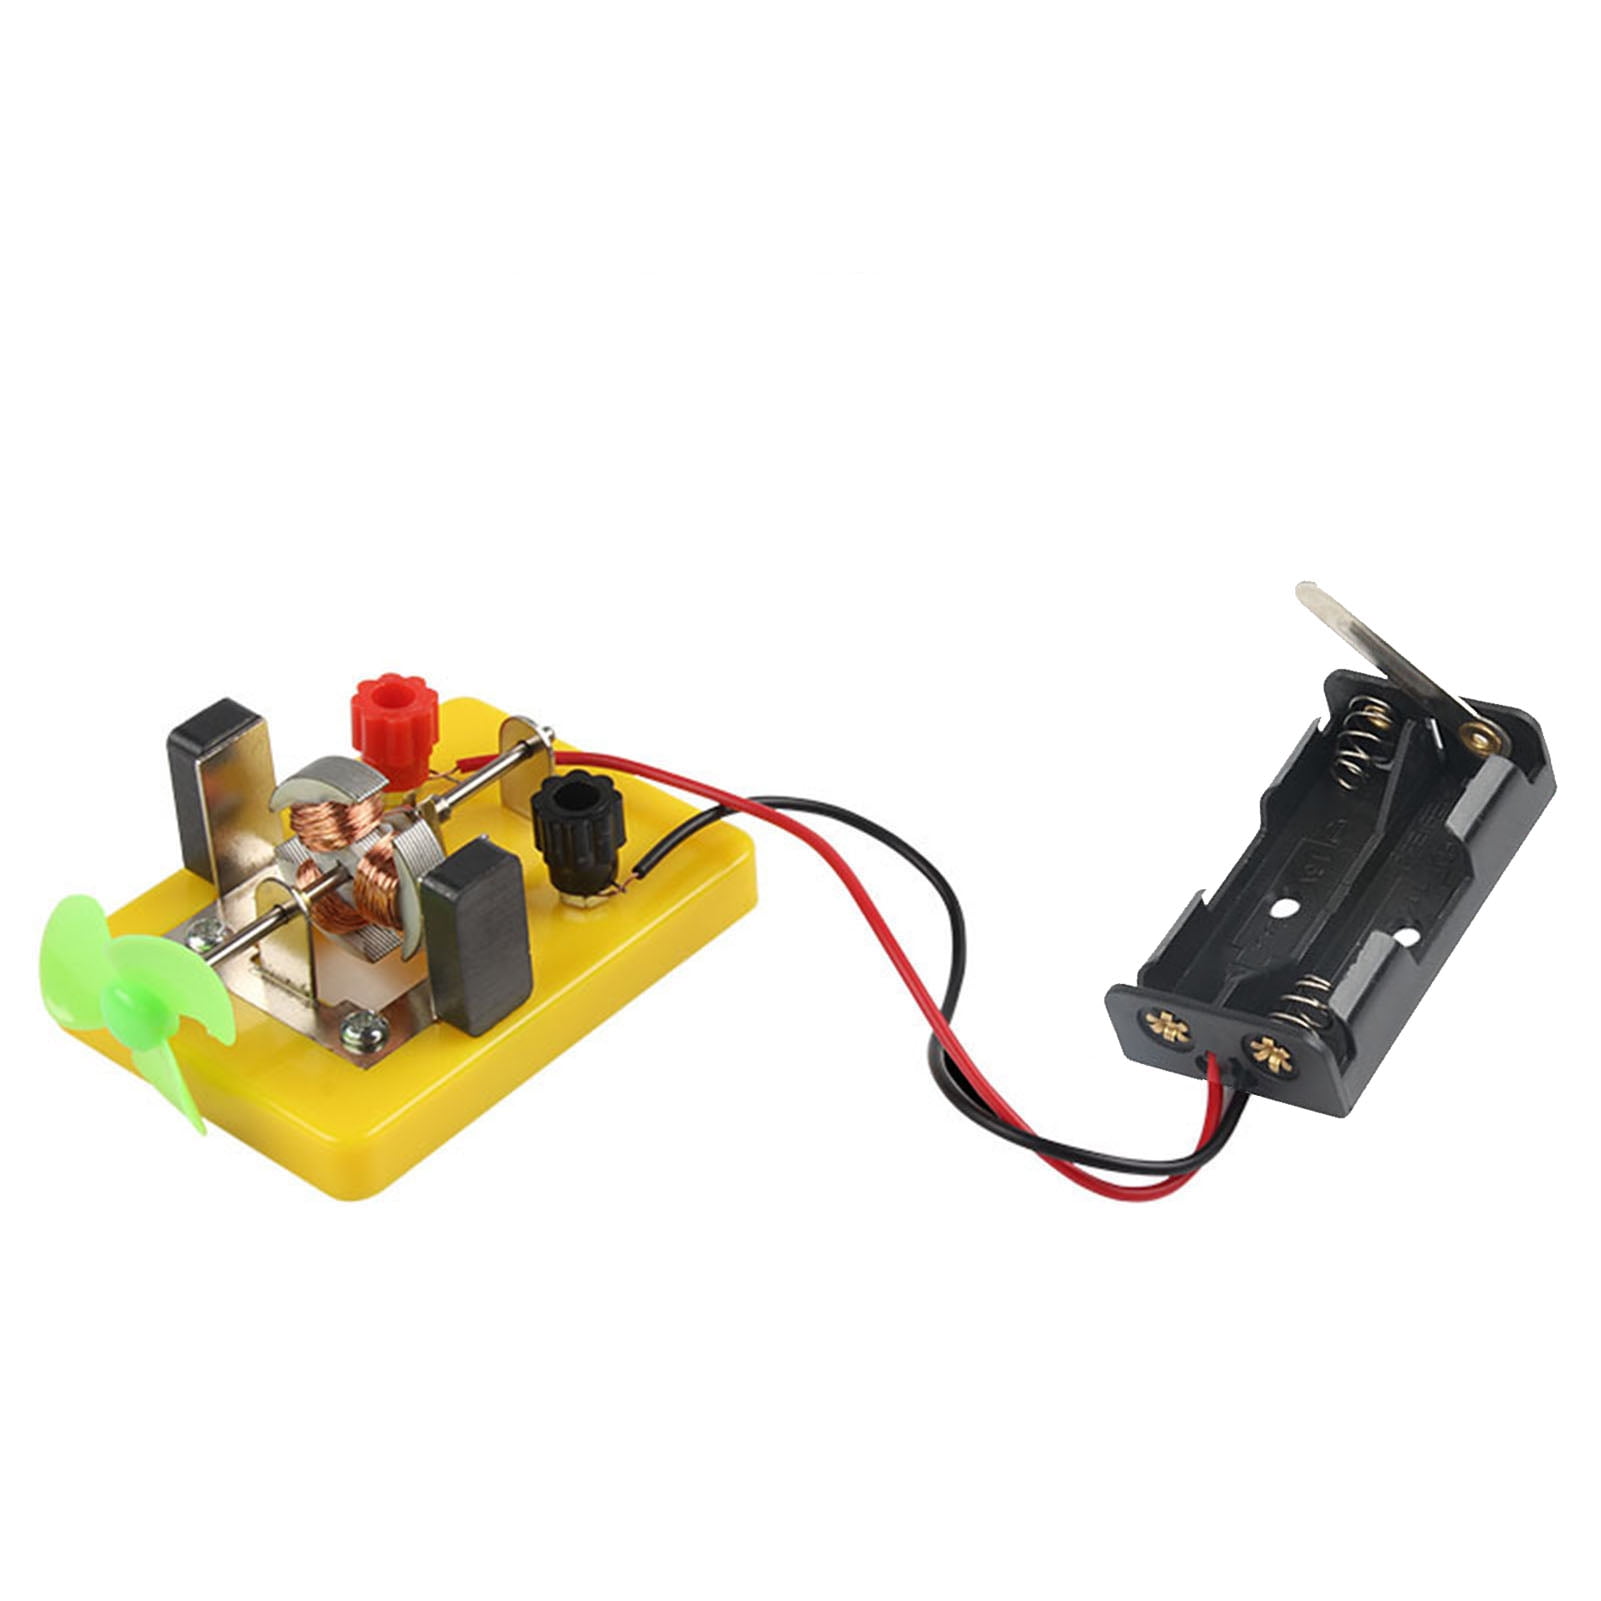 Kids Physical Science Experiment Labs Electricity Kit Electrical Circuit Models 